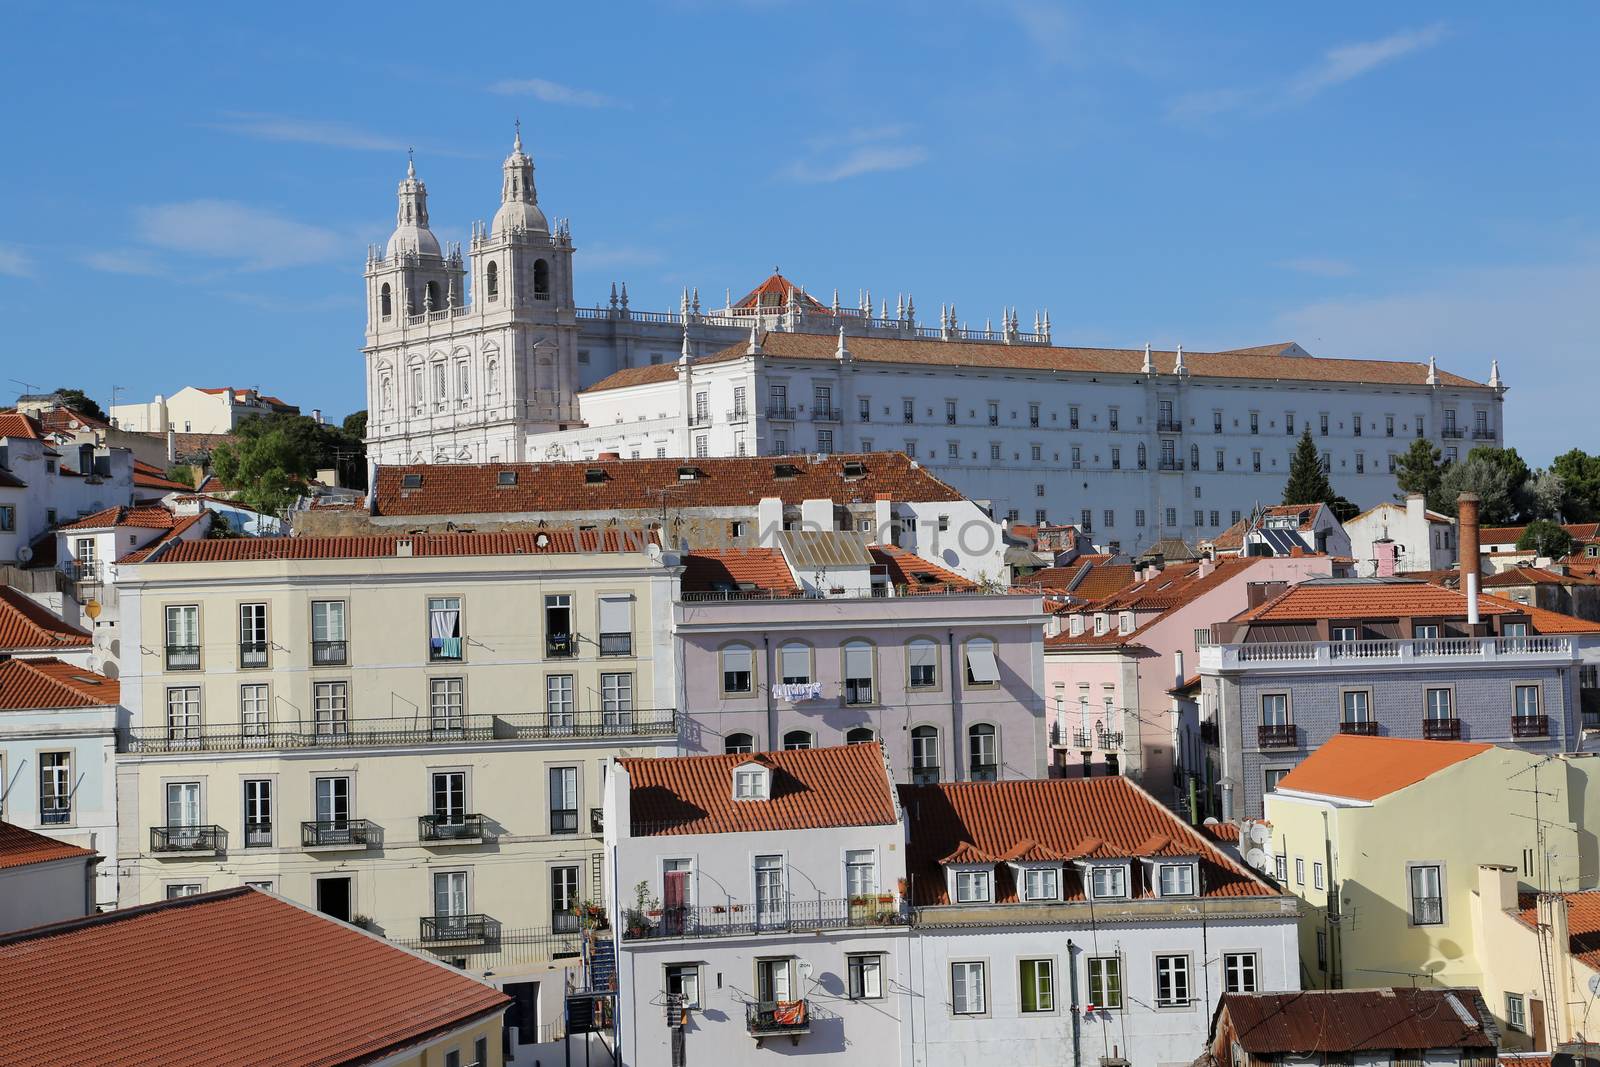 A view on the city of Lisbon - monastery